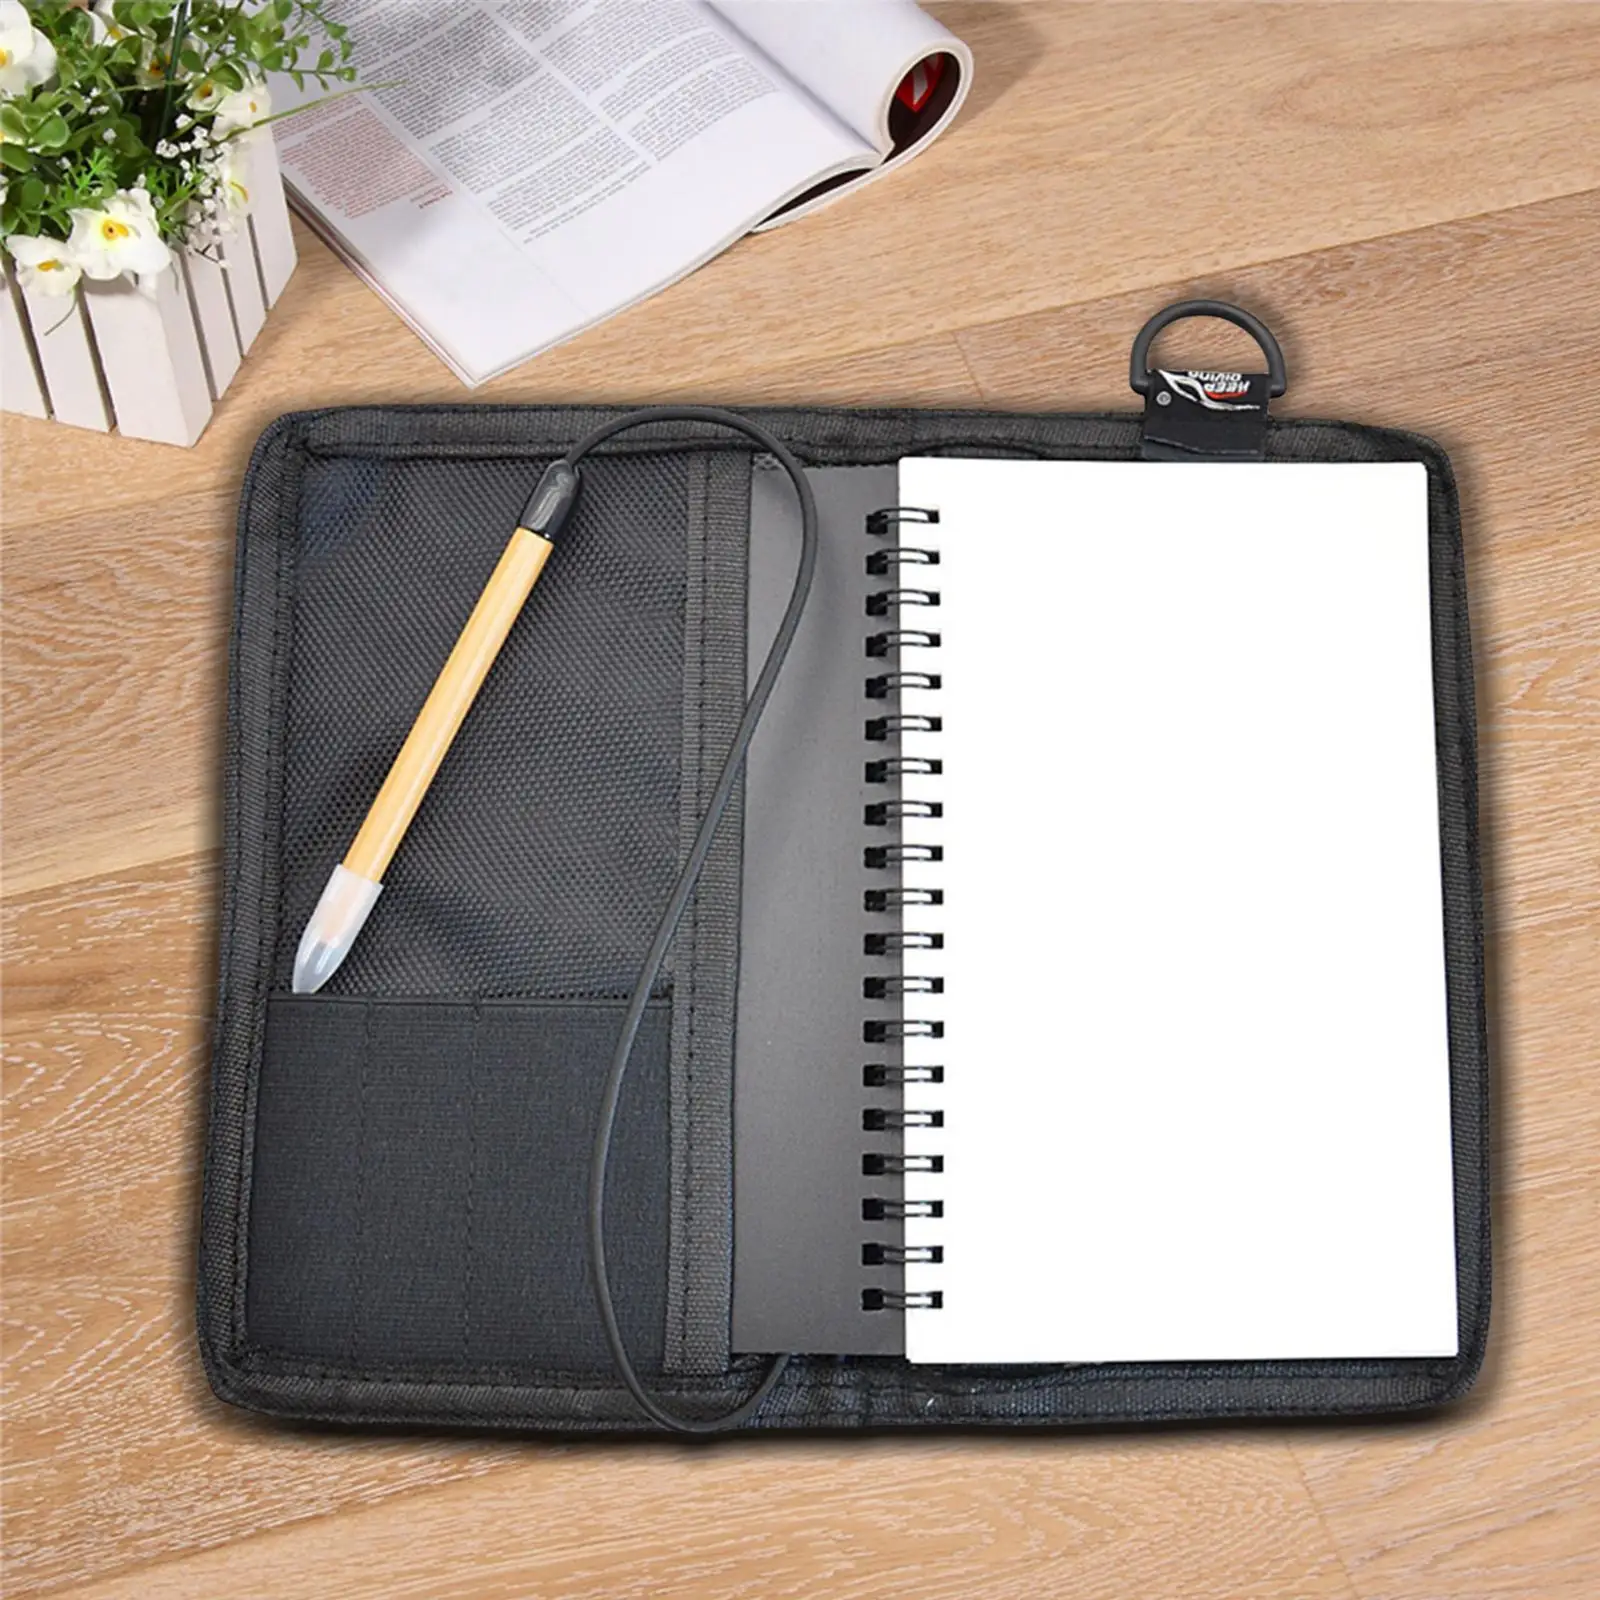 Waterproof Scuba Underwater Dive Writing Wordpad Notebook with Graphite Pencil D Ring for Diving Gear